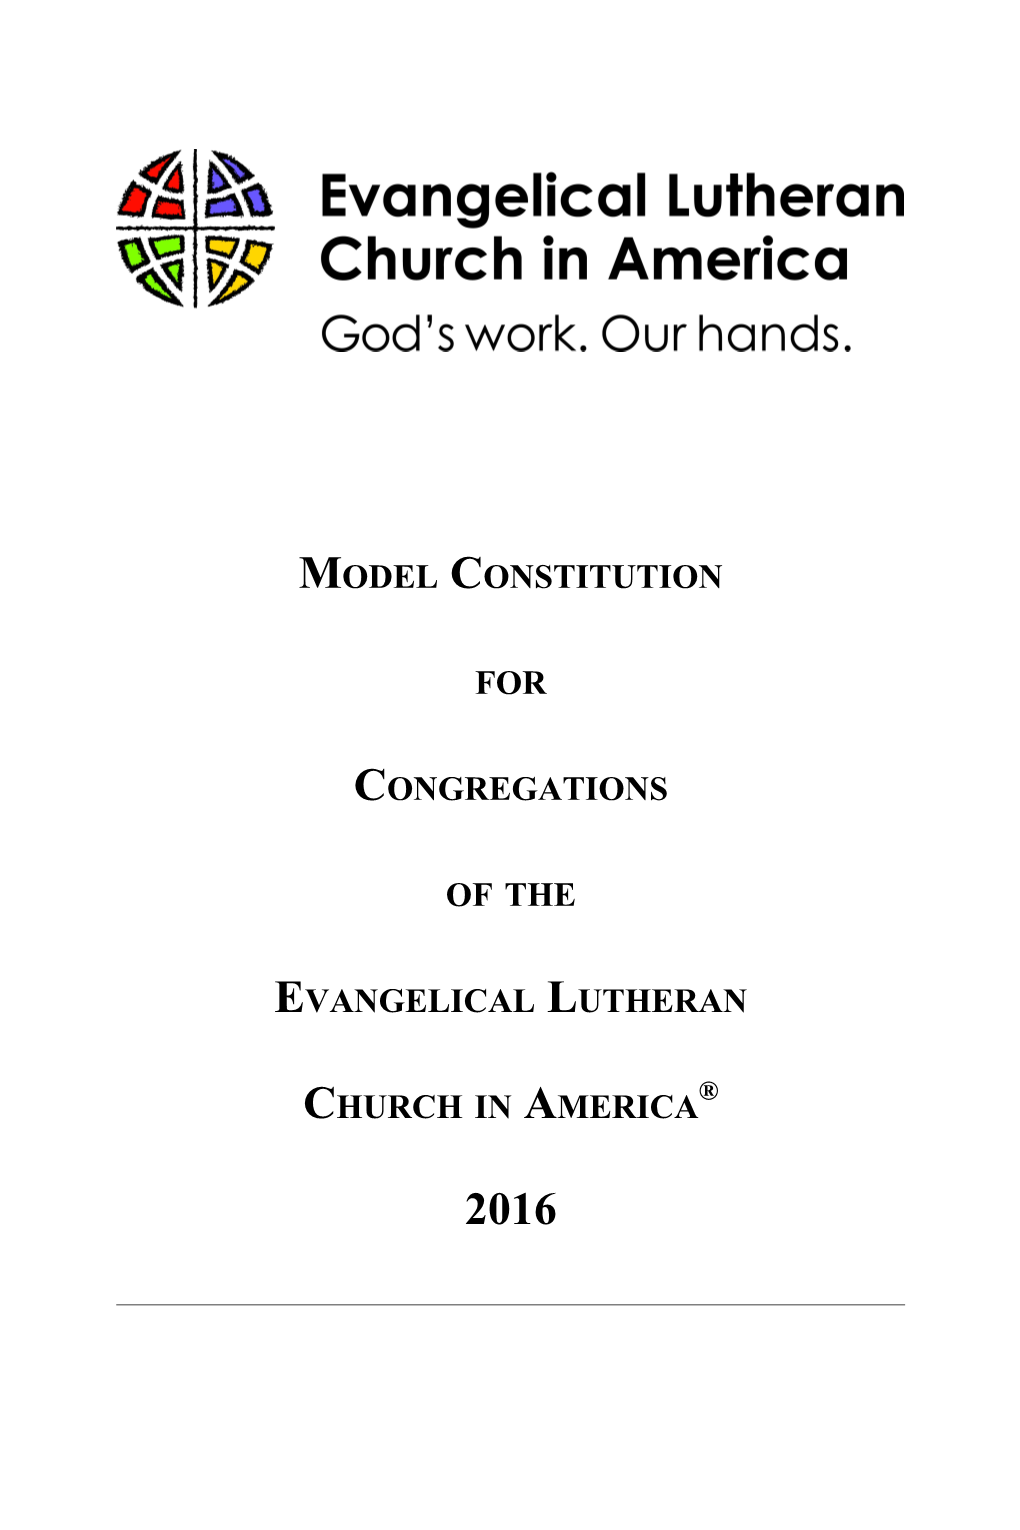 Model Constitution for Congregations 2016